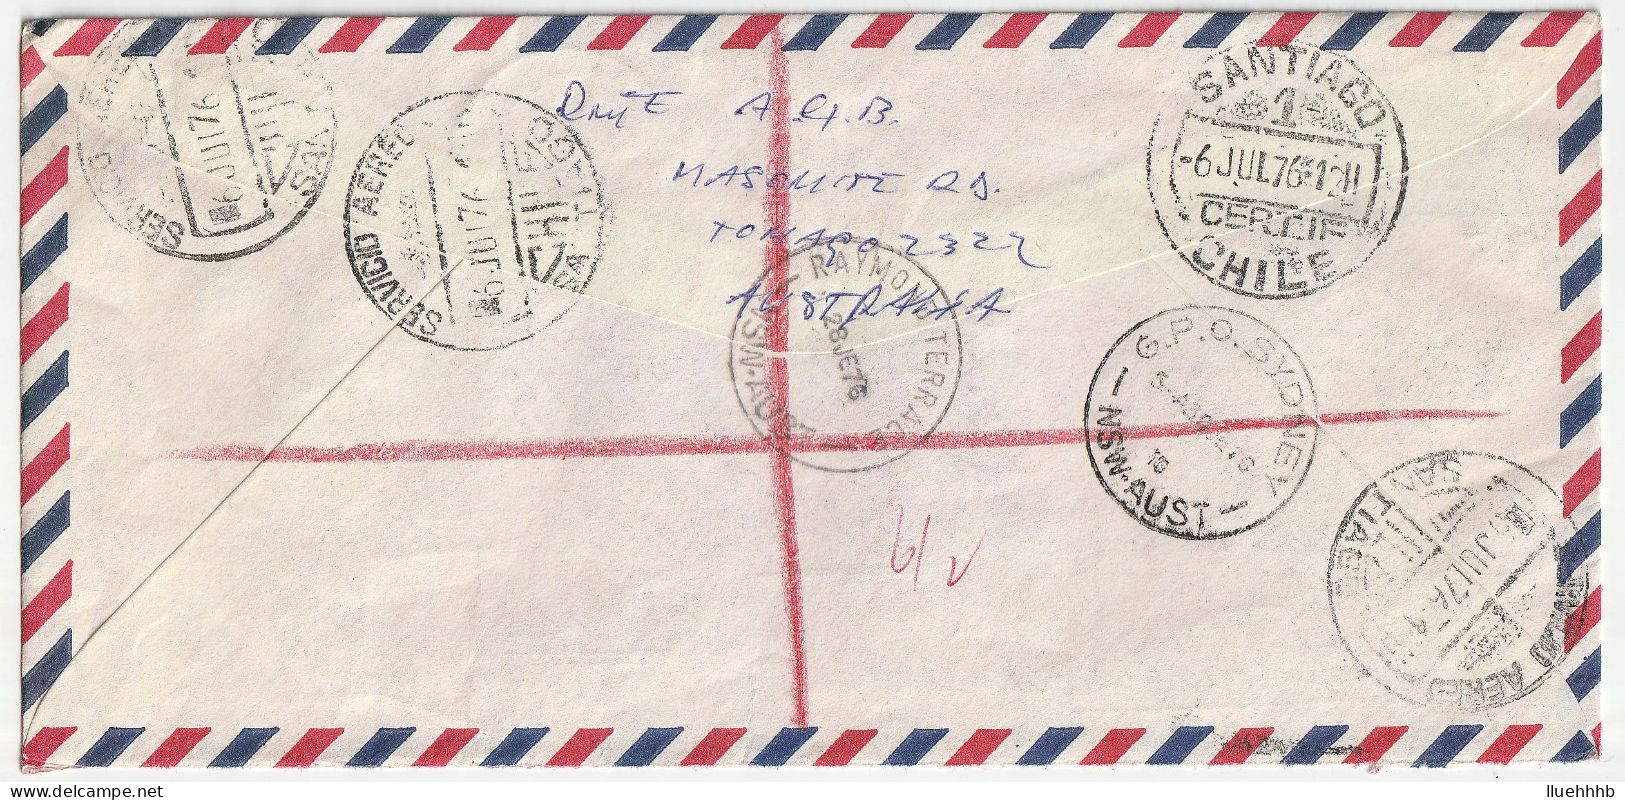 AUSTRALIA: 1976 Registered Airmail Cover To CHILE, $2 Hans Heysen Painting - Ganzsachen